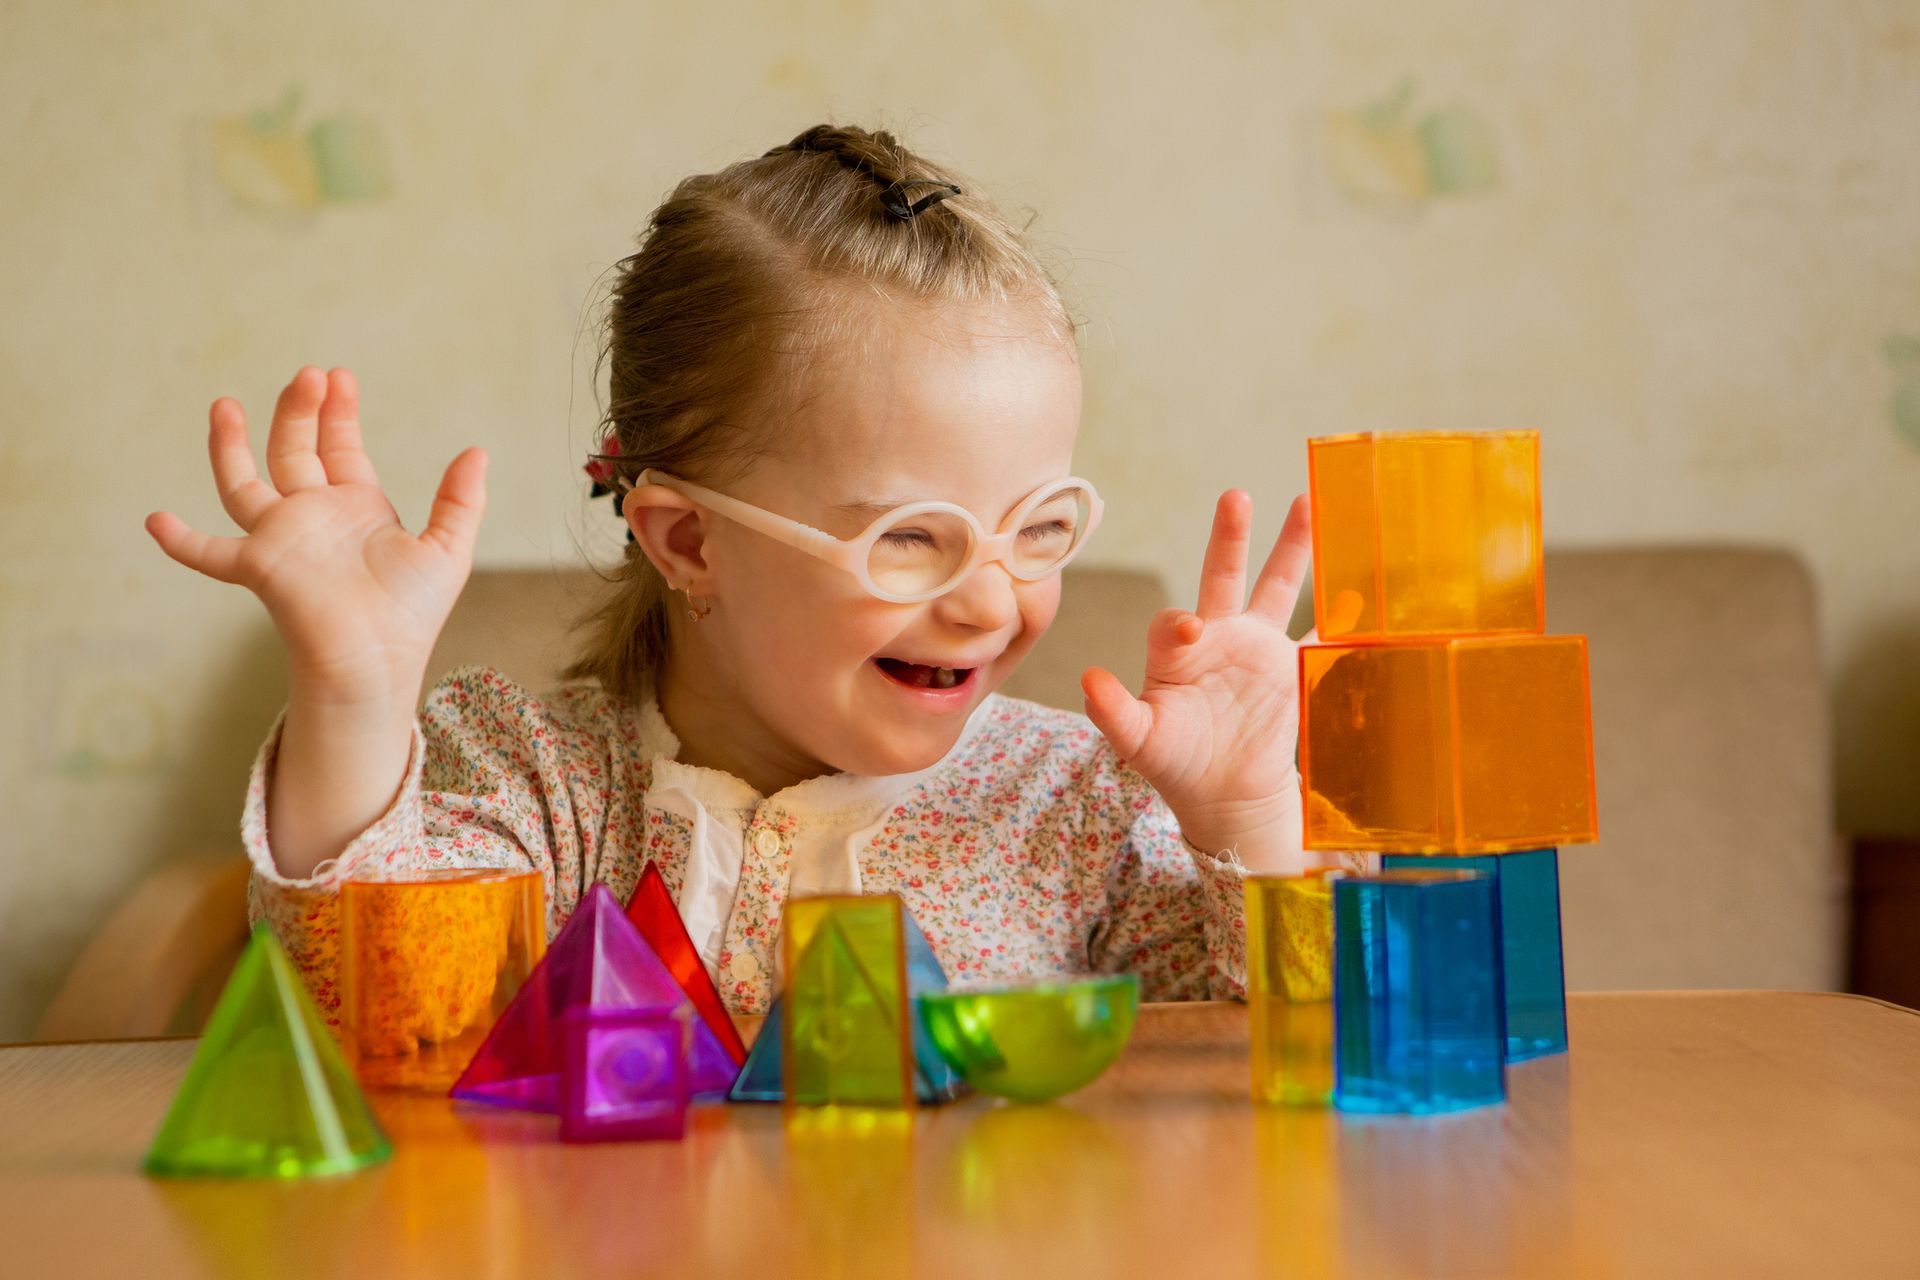 A special needs child playing with toys.